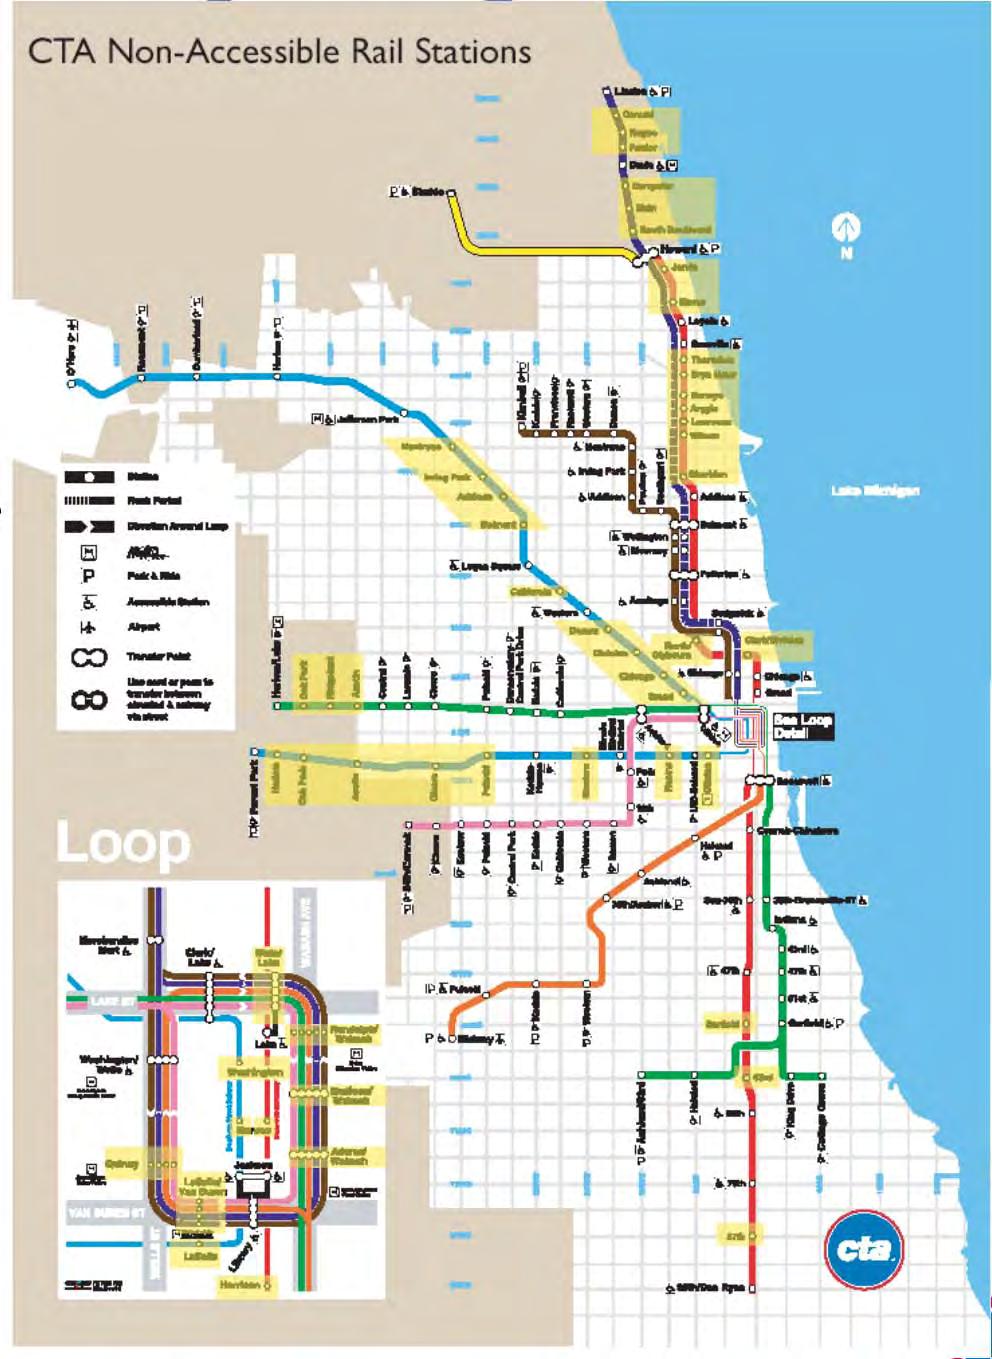 Resulting Stations by Region Loop Northwest (NW) Randolph/Wabash Damen- Blue State/Lake Belmont O Hare Adams/Wabash Irving Park O Hare Loop Outer South Dan Ryan Clark/Division